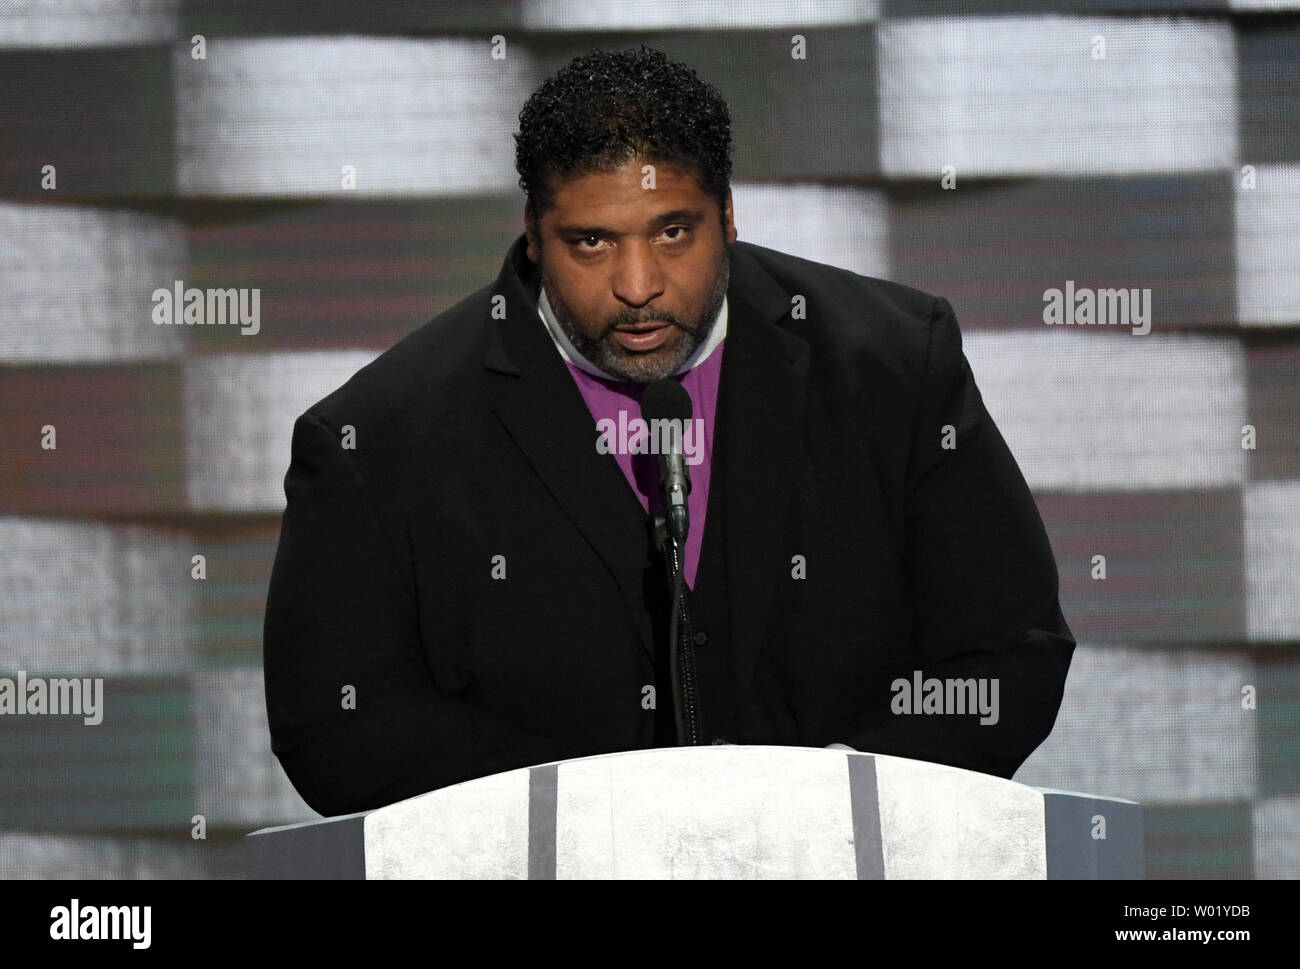 Reverend William Barber, President of the North Carolina chapter of the NAACP, addresses delegates on day four of the Democratic National Convention at Wells Fargo Center in Philadelphia, Pennsylvania on July 28, 2016. Democrat Hillary Clinton will face Republican Donald Trump in the national election. Photo by Pat Benic/UPI Stock Photo